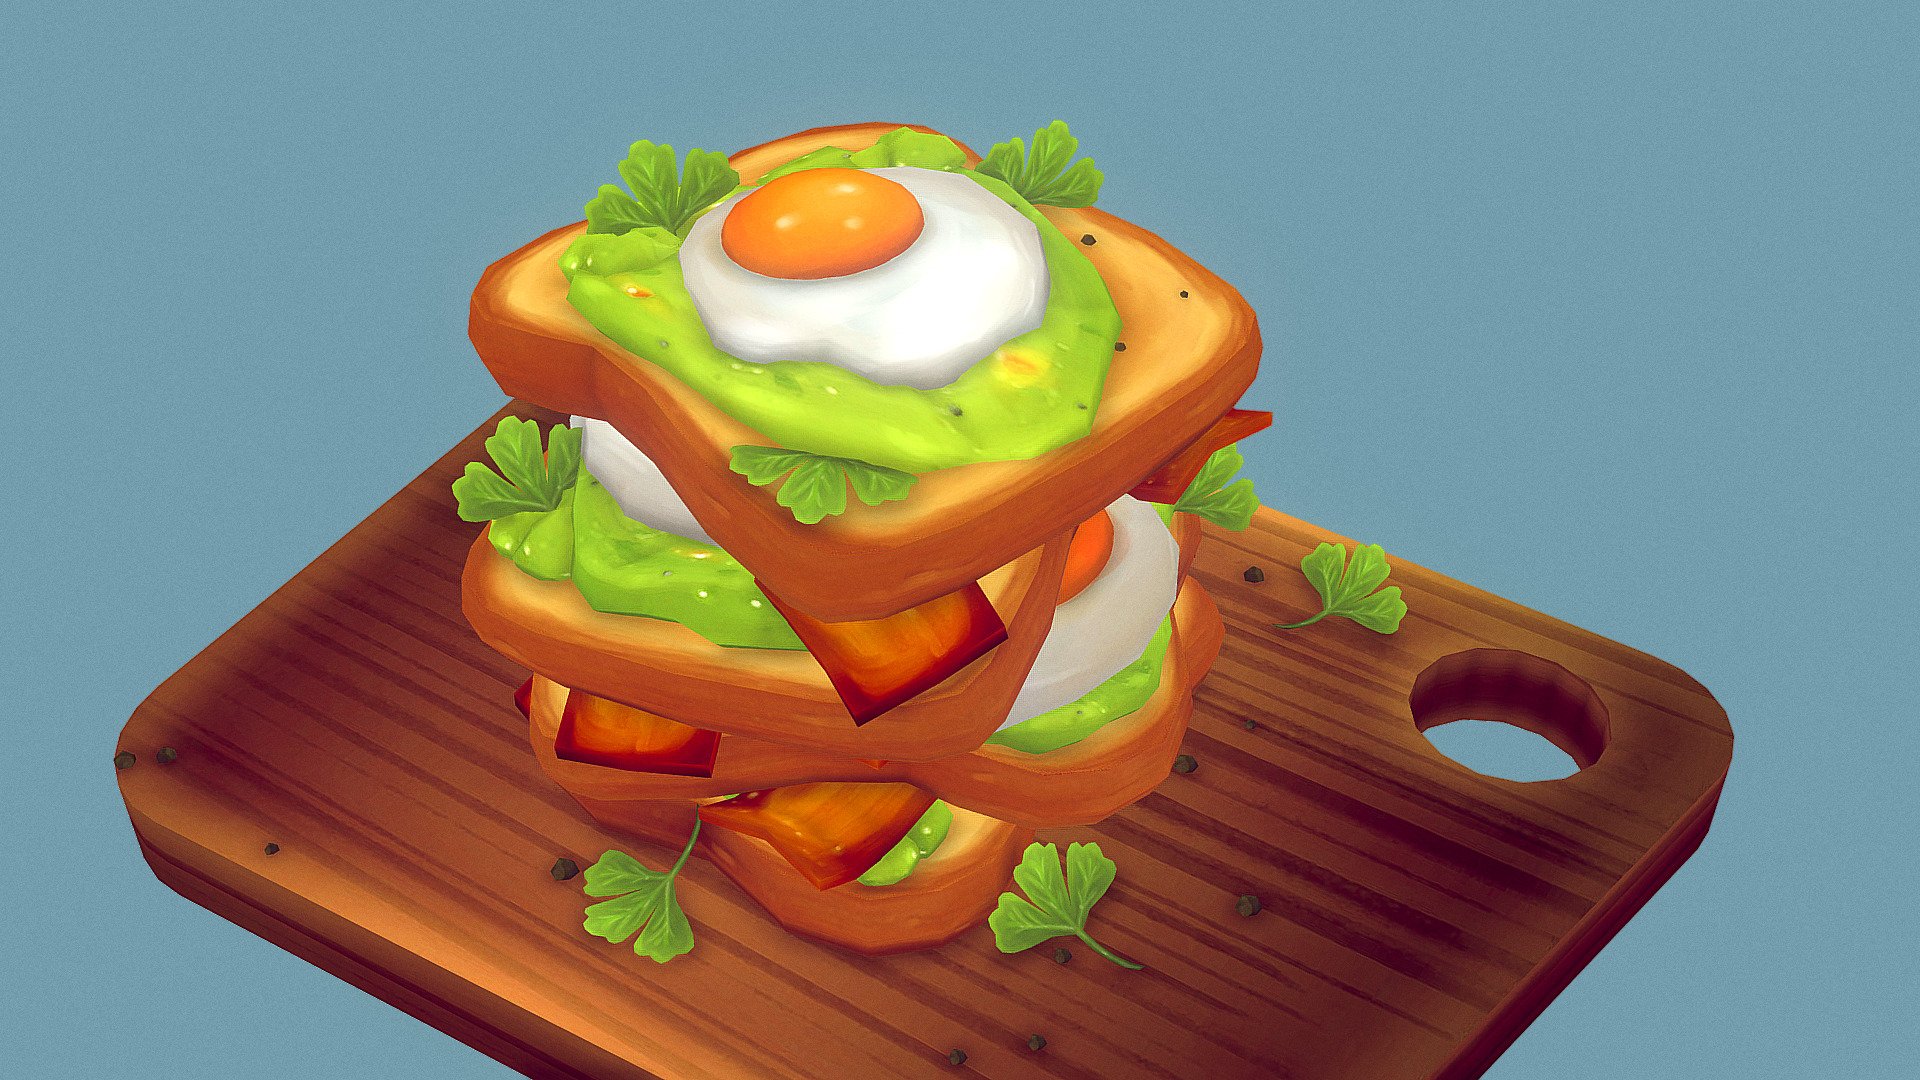 I’ve practiced hand painted textures on this one on my surface pro. Still much to learn. 

A big shout-out goes to Curlscurly &hellip;thanks for the inspiration.

The breakfast consists of toast, bacon, egg, guacamole, pepper and parsley&hellip;delicious!

More Pictures can be found here - Breakfast - 3D model by Sebastian Irmer (@.sebastian.) 3d model